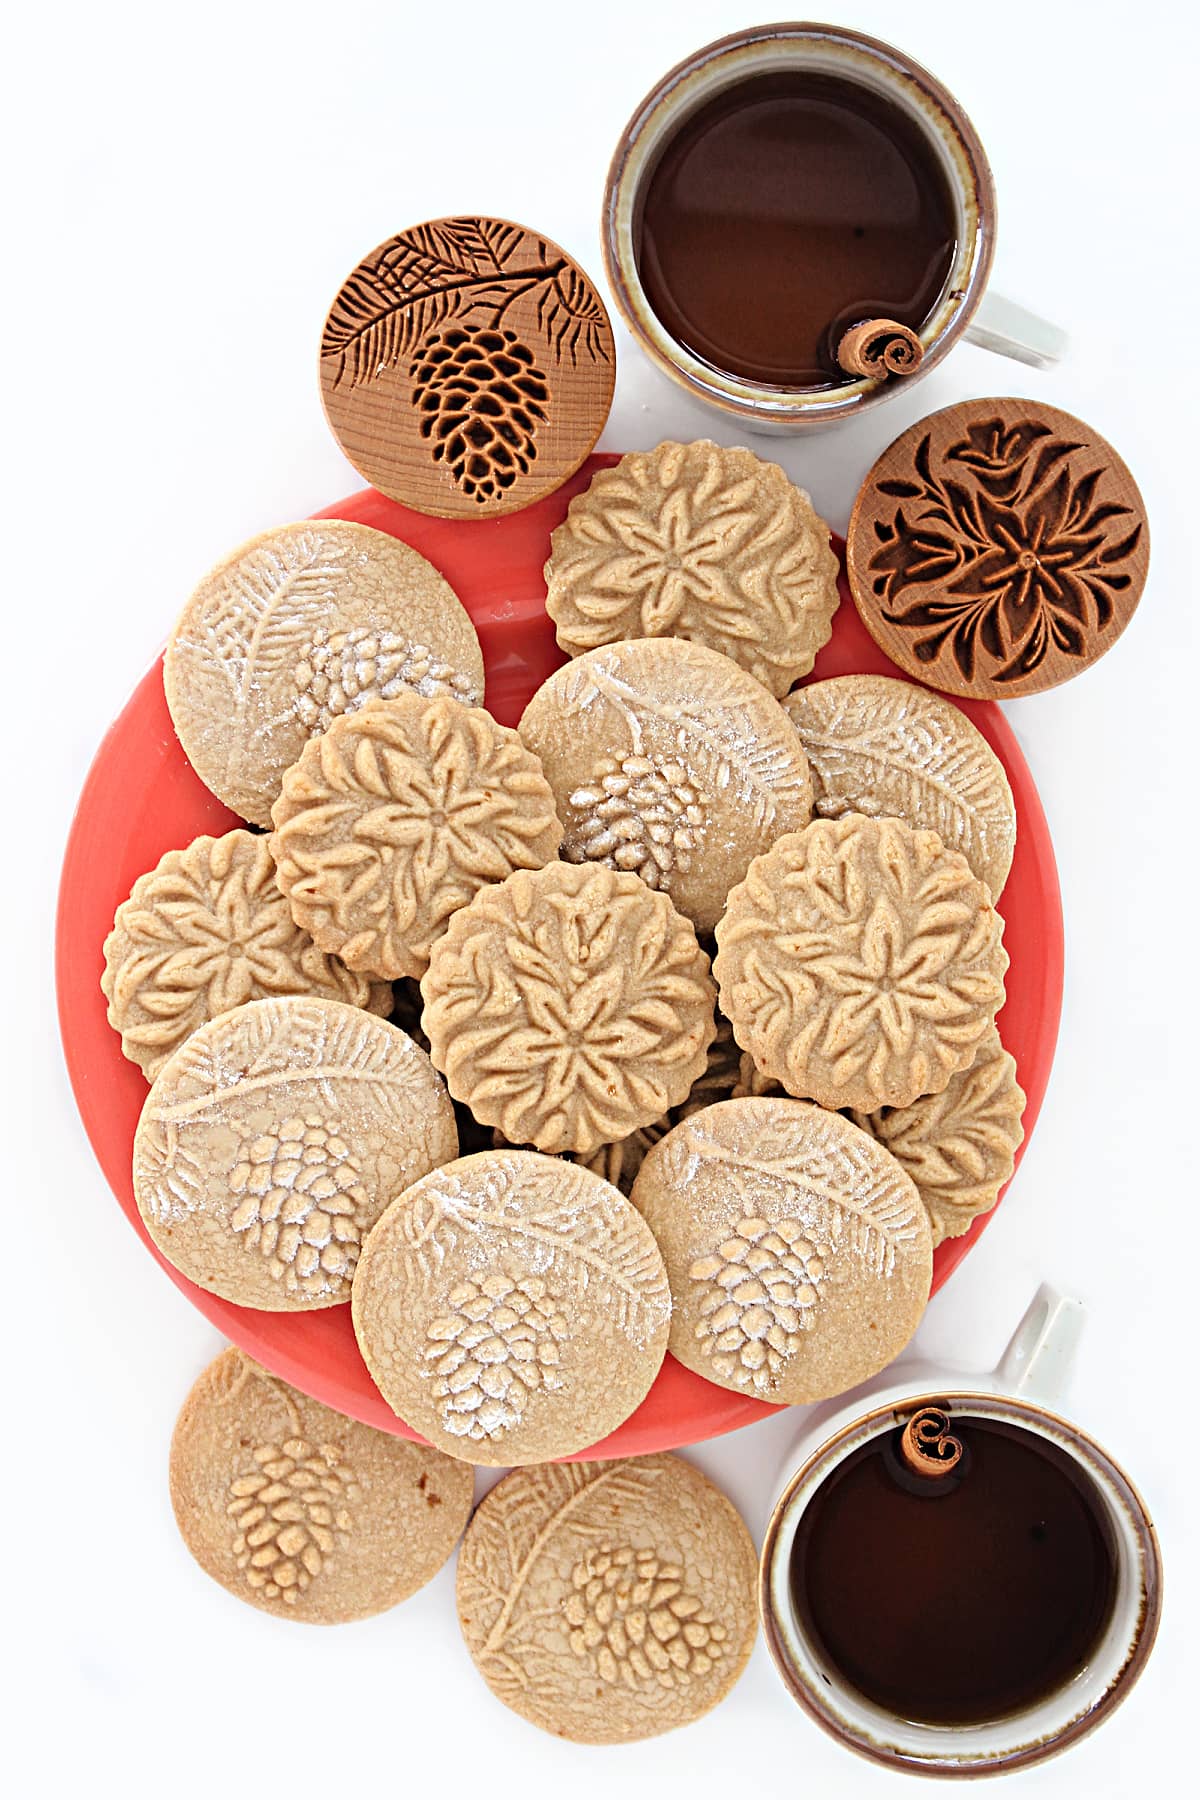 Apple Cider Cookies stamped with flower and pine cone designs.